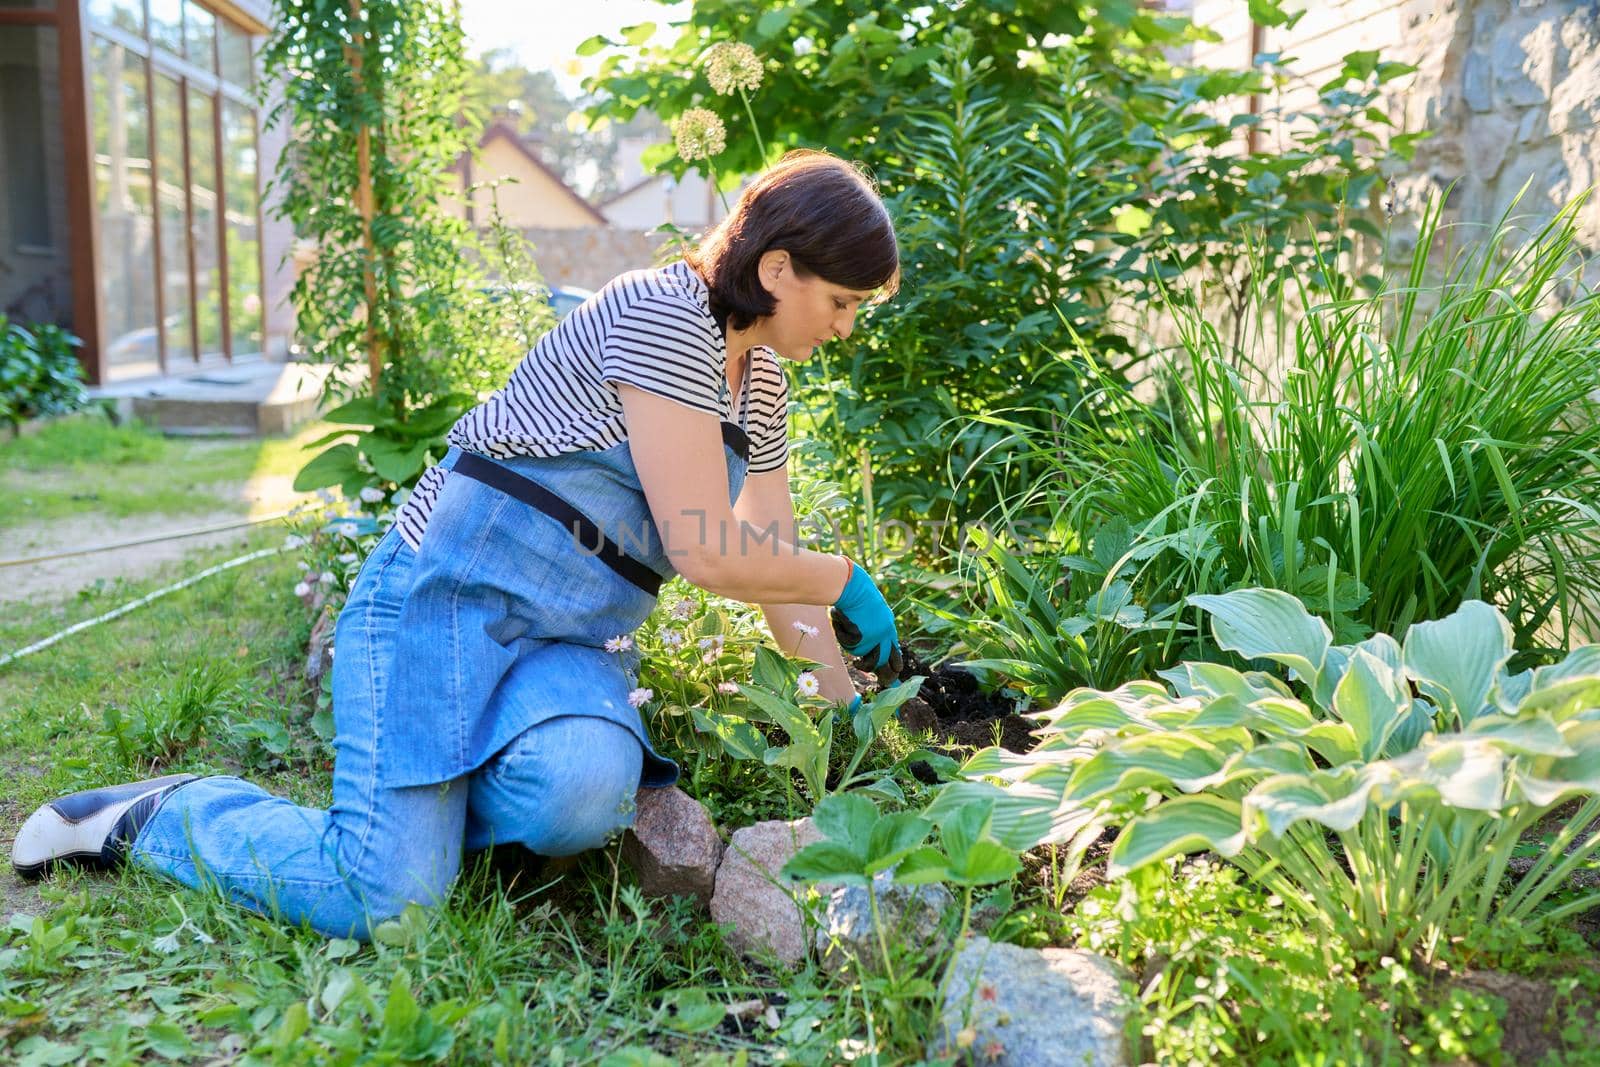 Springtime, spring gardening in backyard. Female in apron of gardening gloves with shovel planting flowering plants in ground from pot. Sunny day green plants, hobbies and leisure of middle aged woman